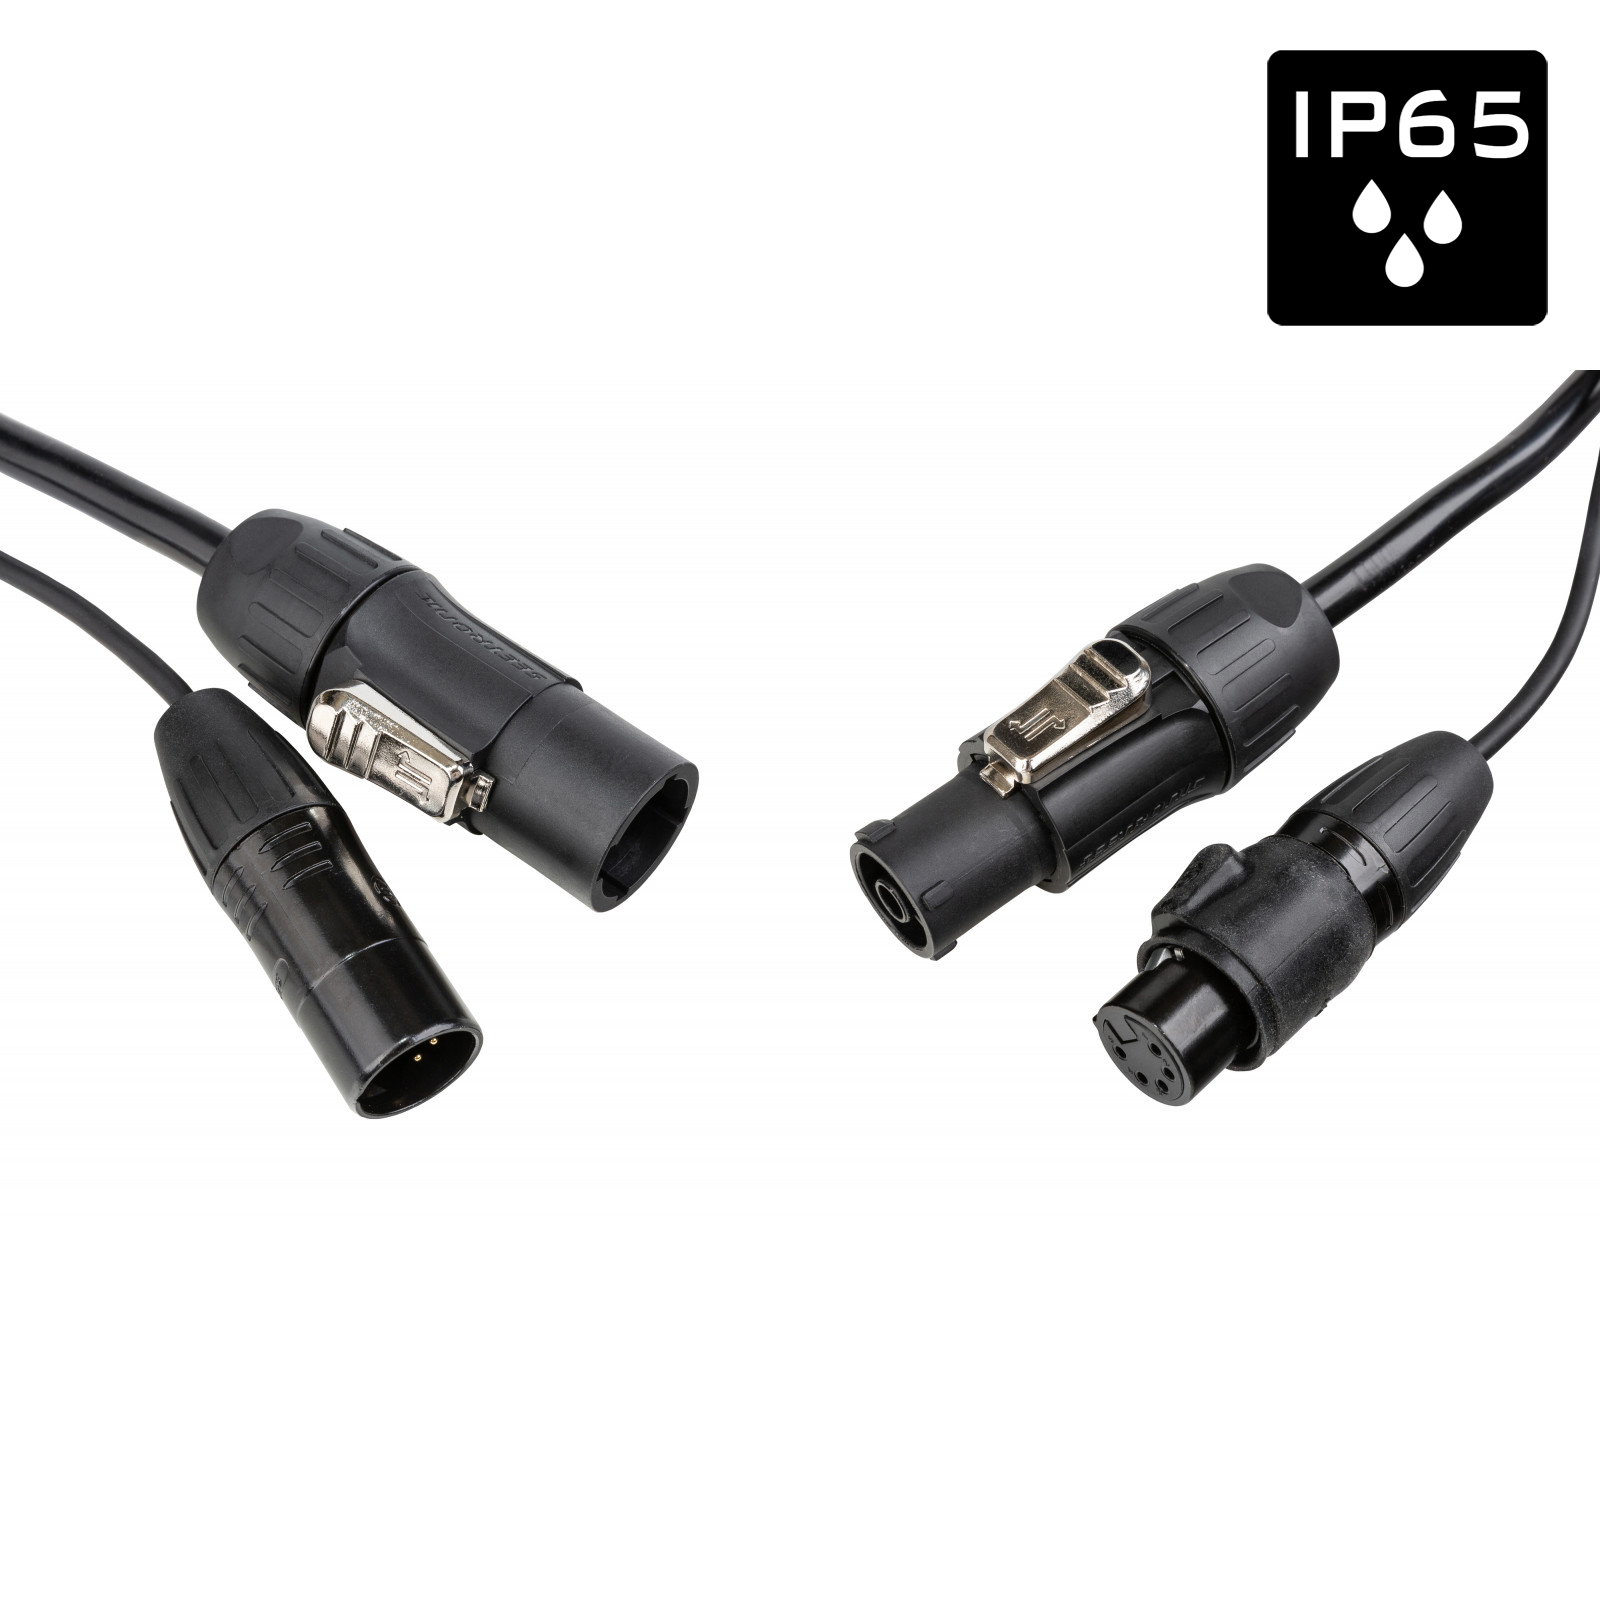 IP65 Outdoor combi cable with Seetronic XLR 5pin and True1 compatible connectors - Length 3m